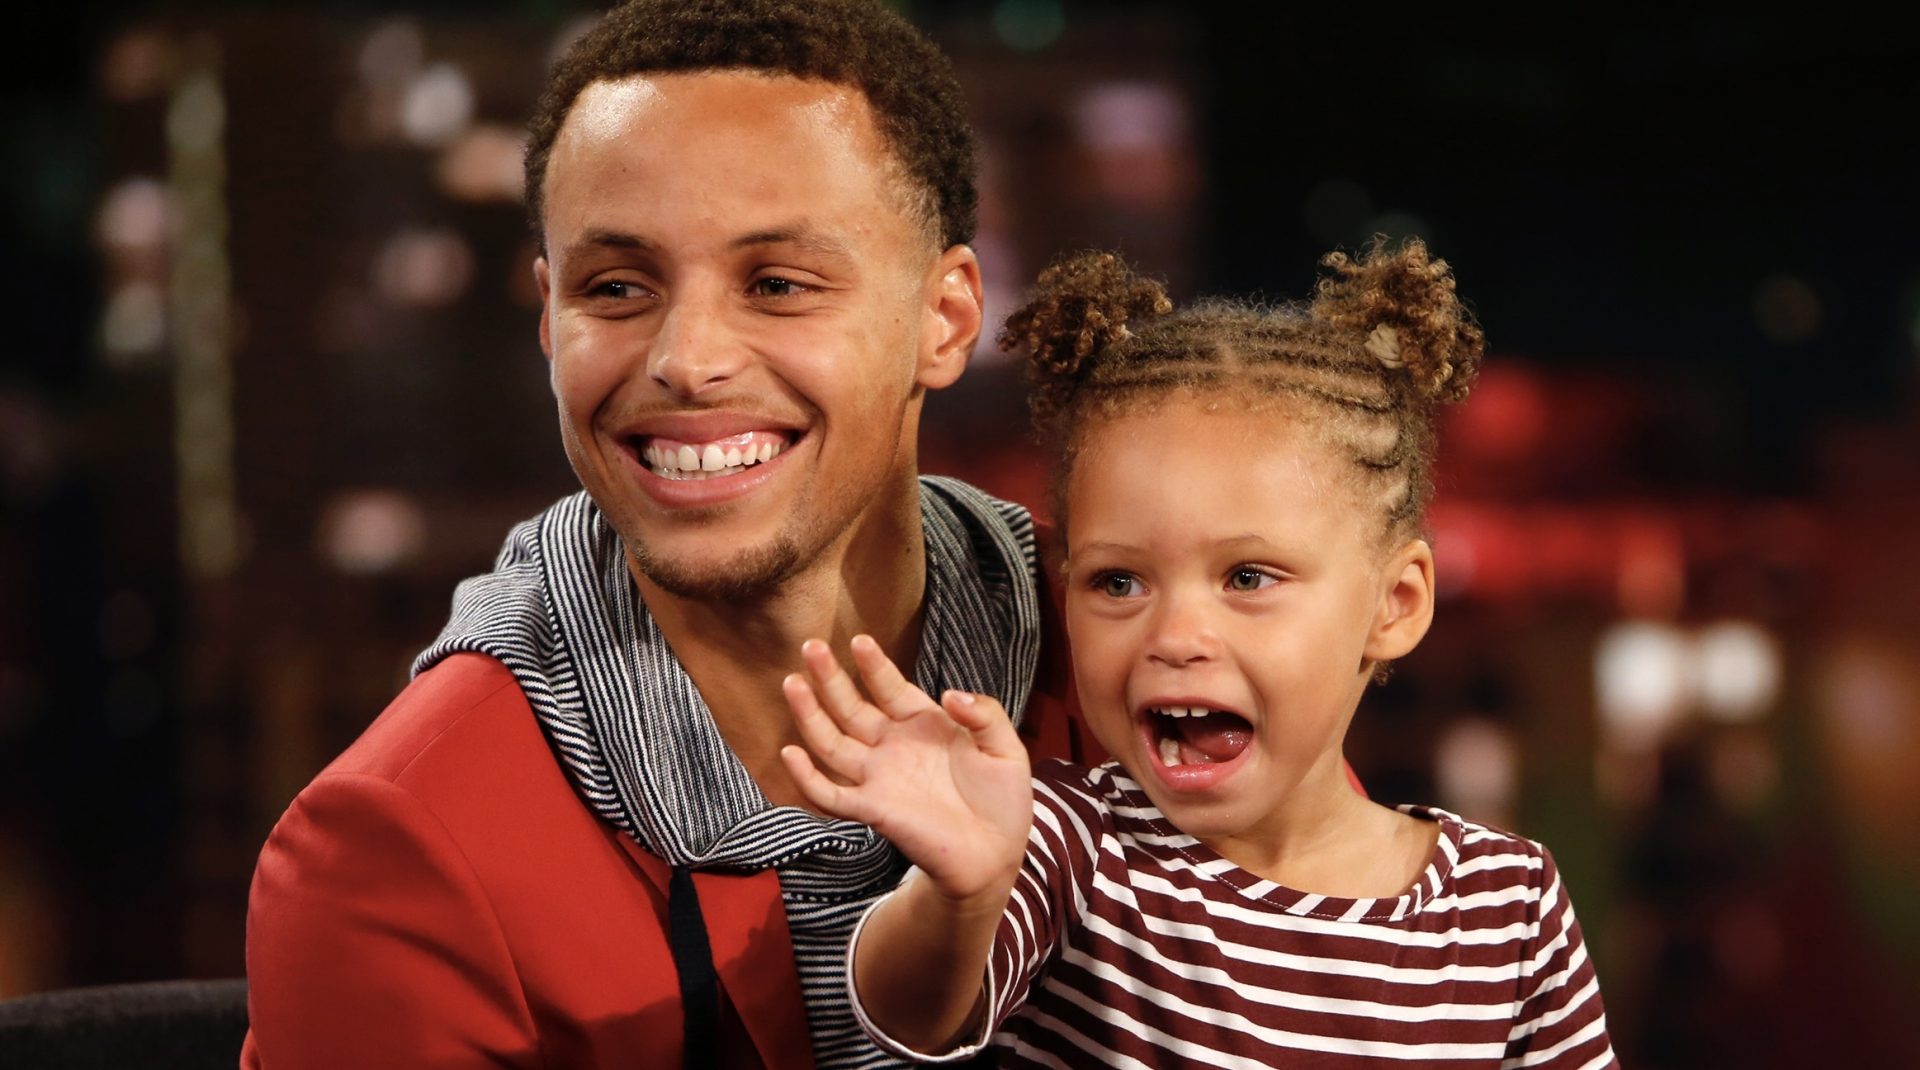 How old is steph curry daughter